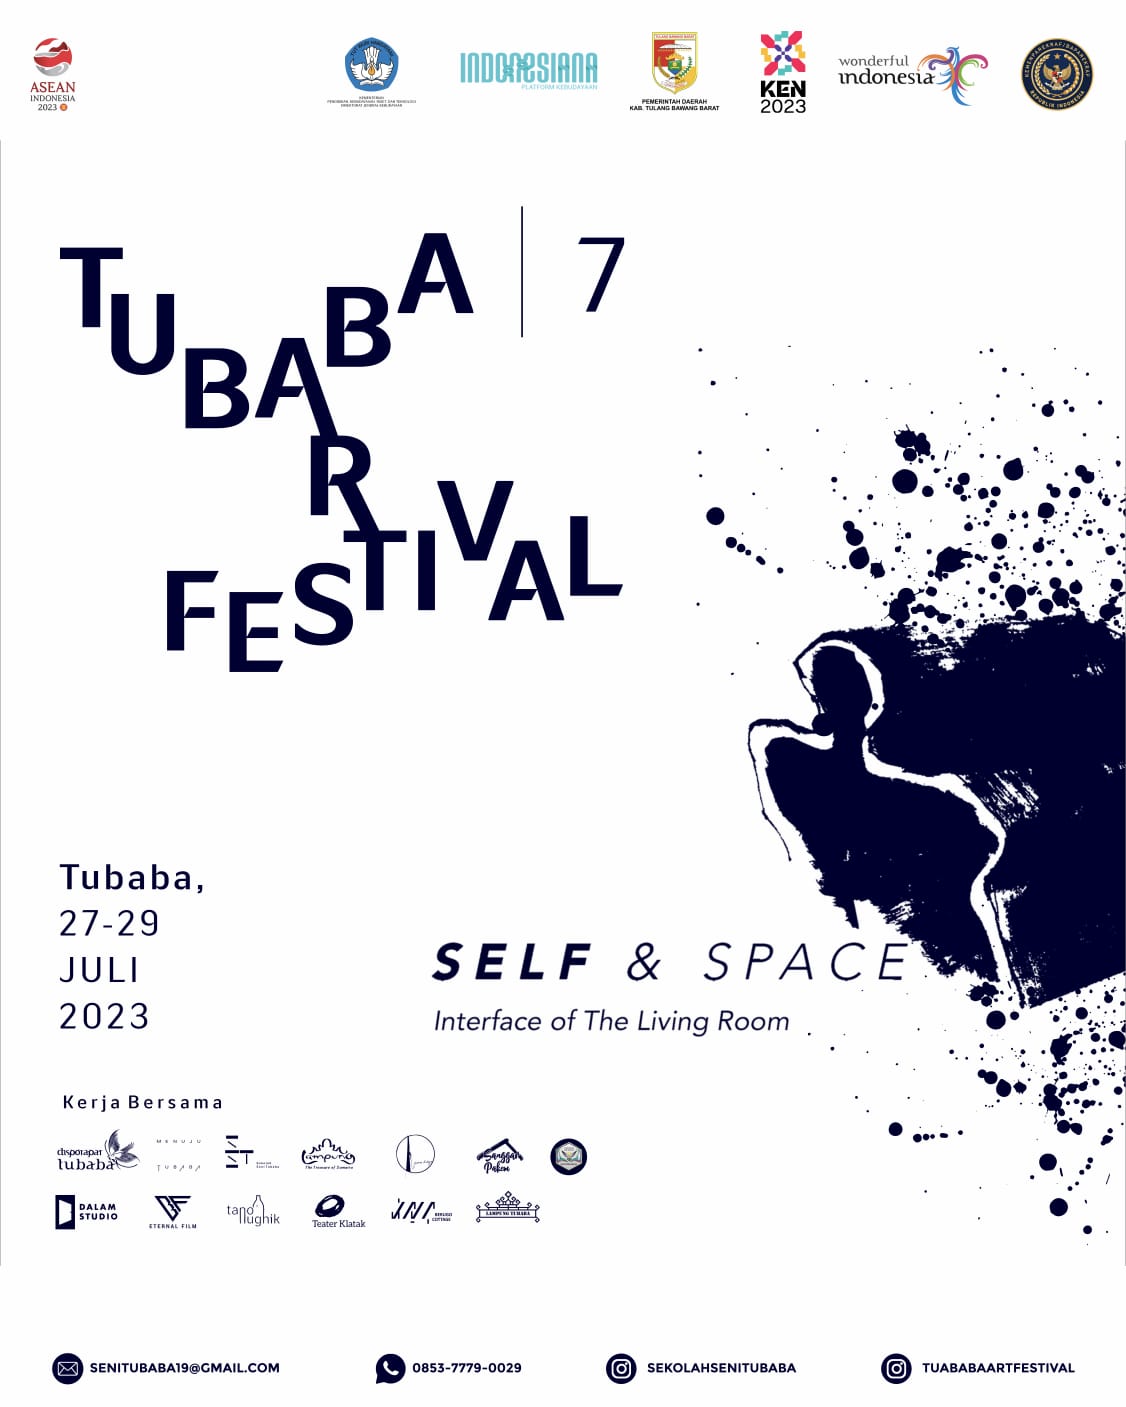 Tubaba Art Festival #7 Self and Space Interface of The Living Room